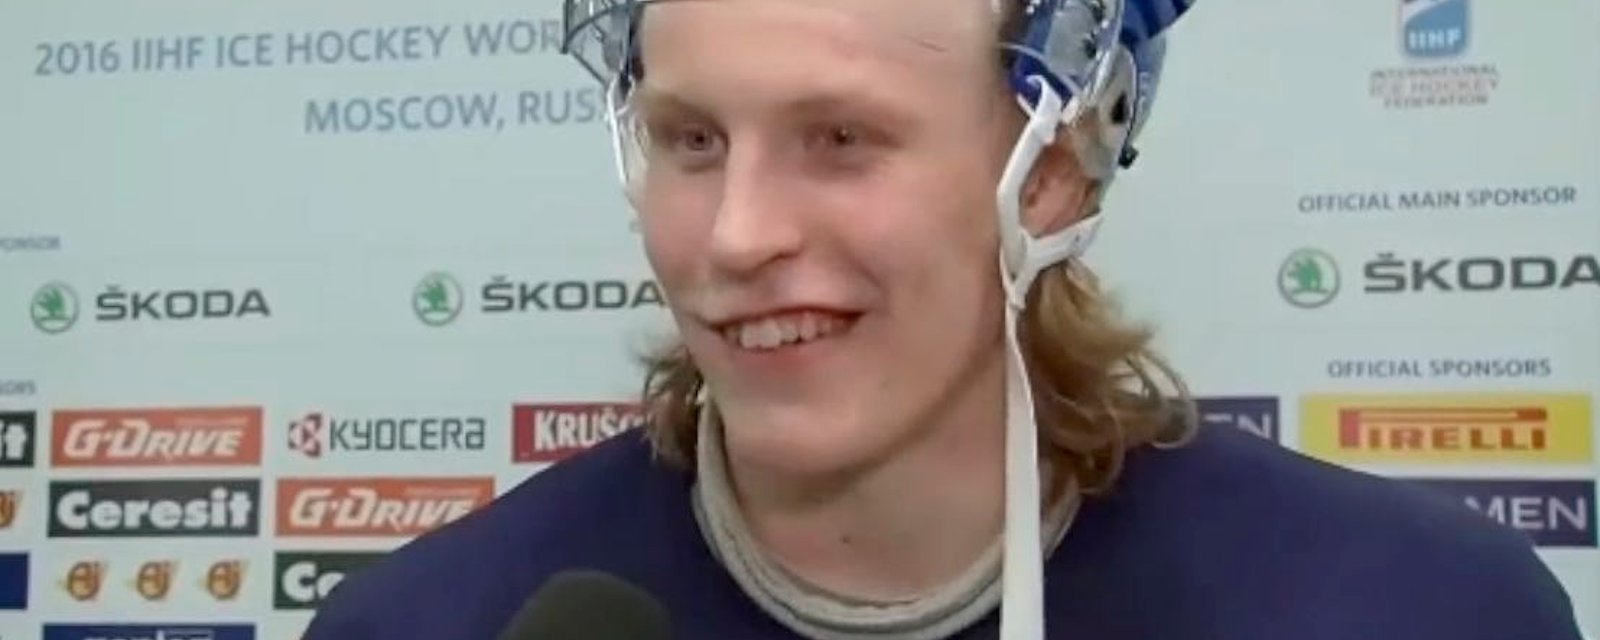 Blue Jackets pull the impossible to get Laine on ice ASAP! 